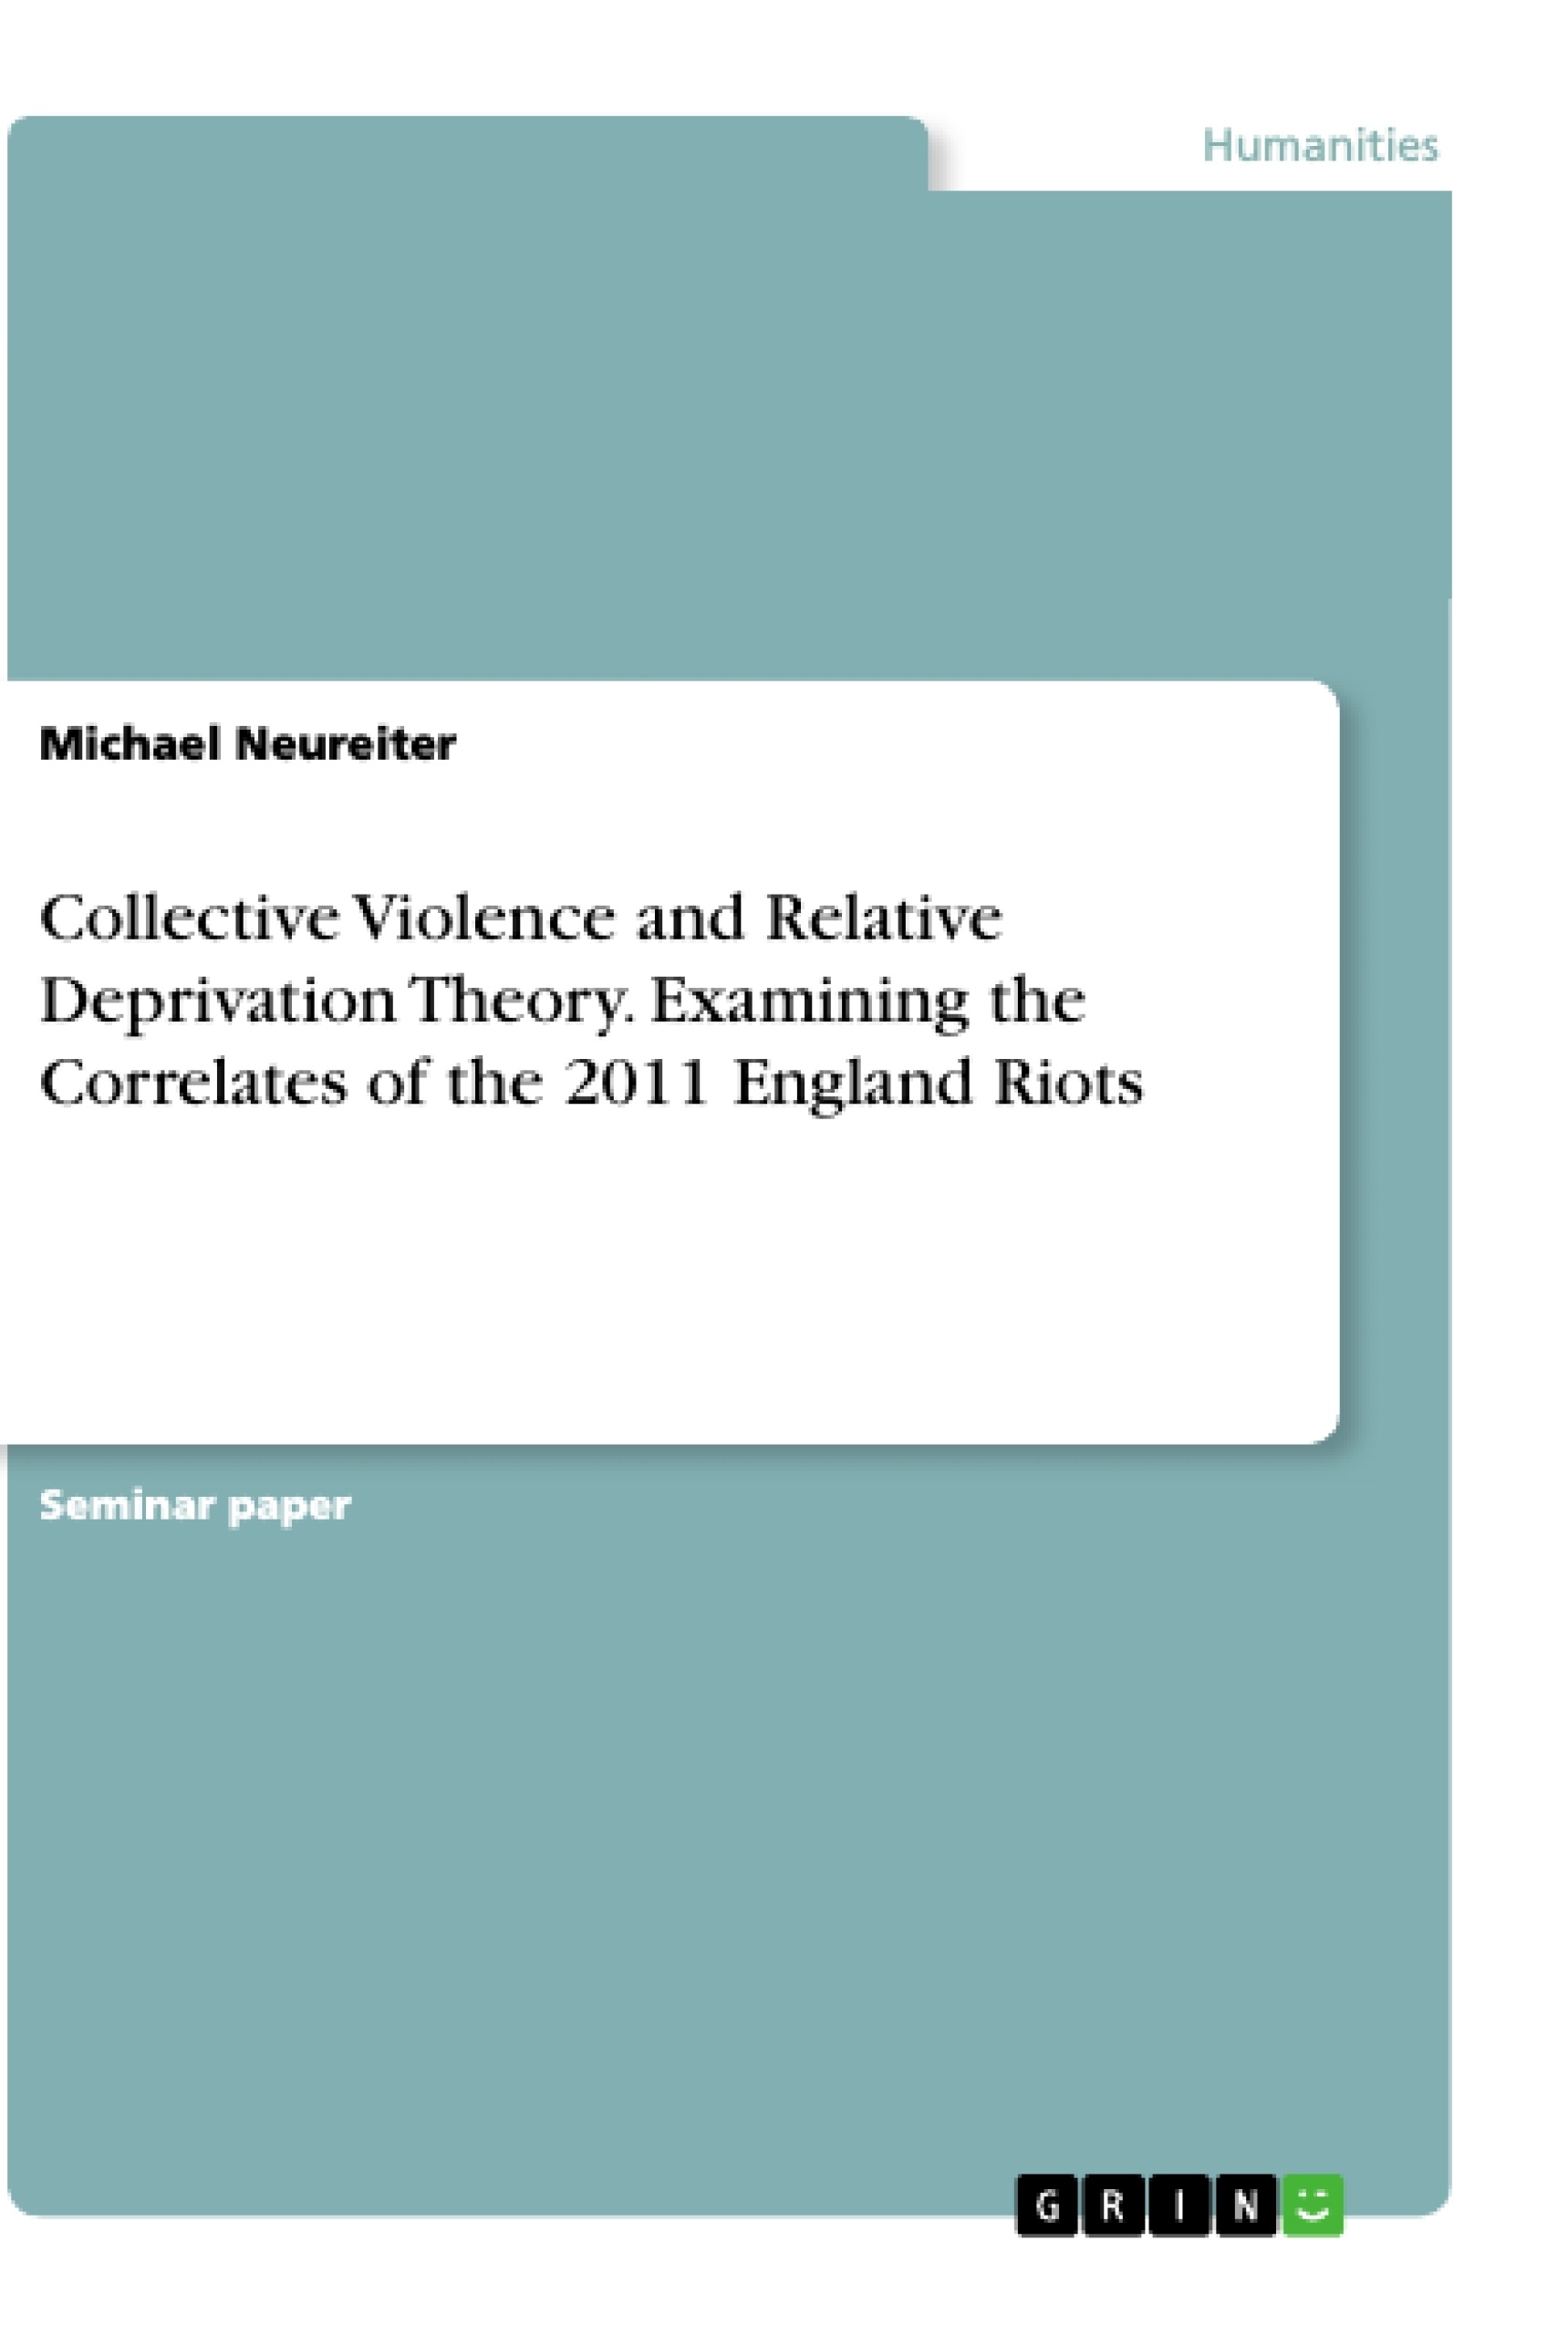 Titre: Collective Violence and Relative Deprivation Theory. Examining the Correlates of the 2011 England Riots